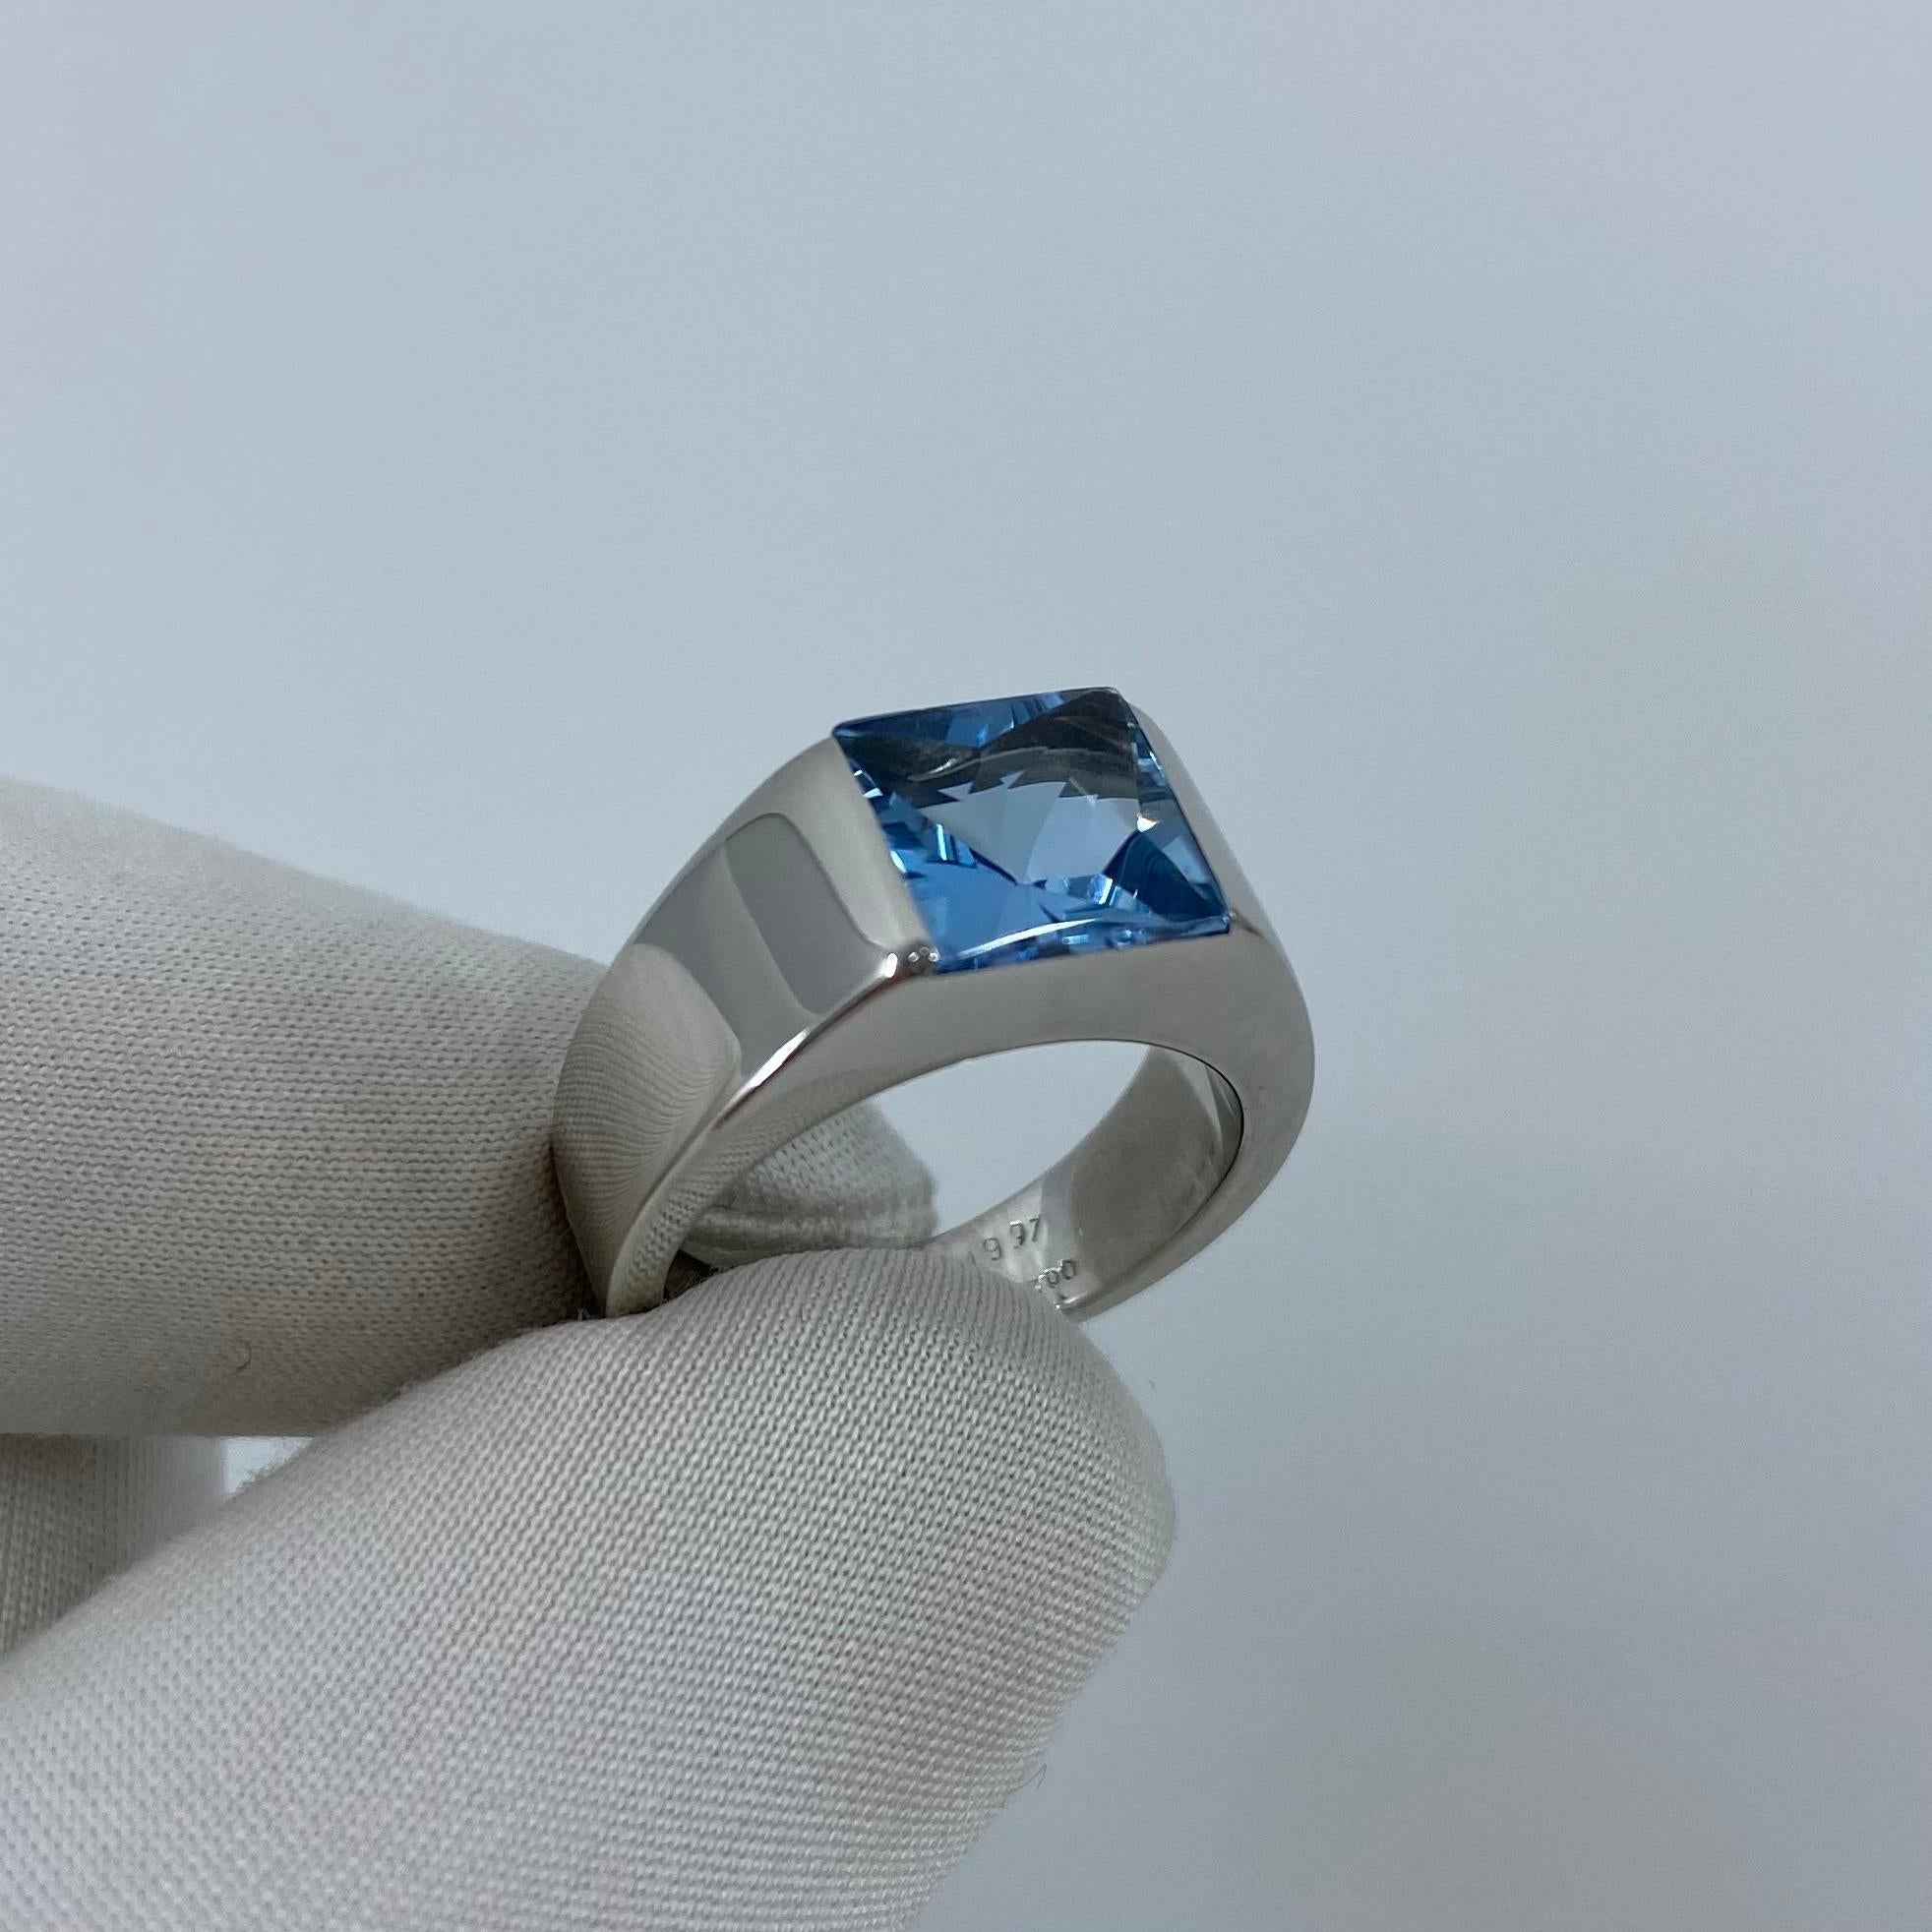 Cartier Blue Topaz 18 Karat White Gold Tank Ring.

Stunning white gold ring with a large 8mm tension set Swiss blue topaz. Fine jewellery houses like Cartier only use the finest of gemstones and this topaz is no exception. A top quality topaz with a